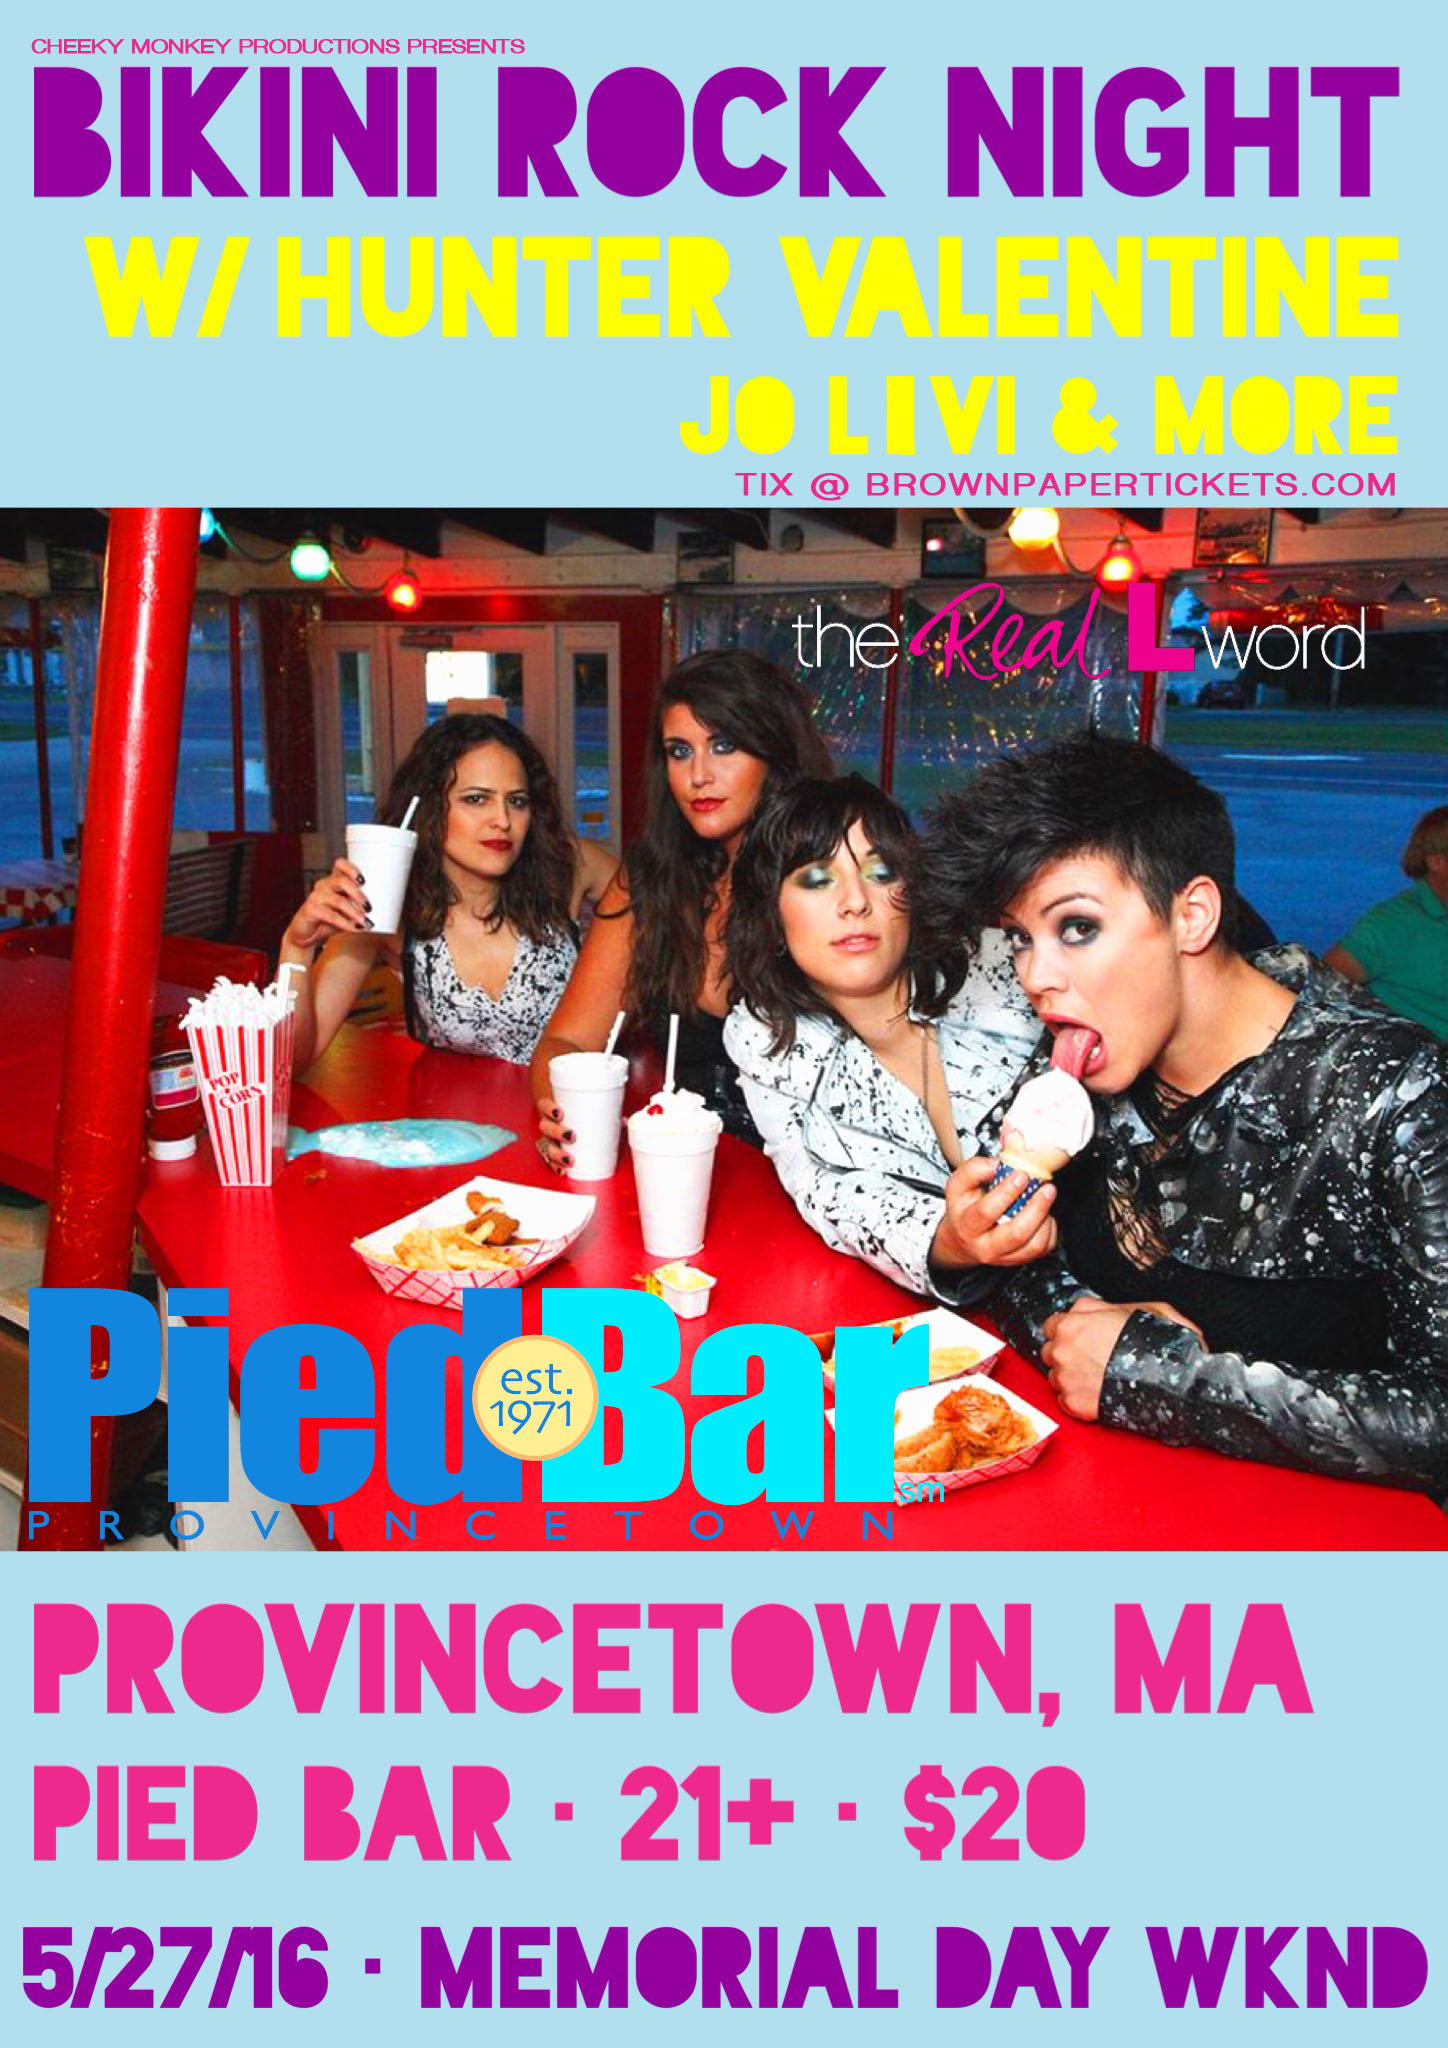 HUNTER VALENTINE MEMORIAL DAY WEEKEND at PIED BAR IN PTOWN [05/27/16]